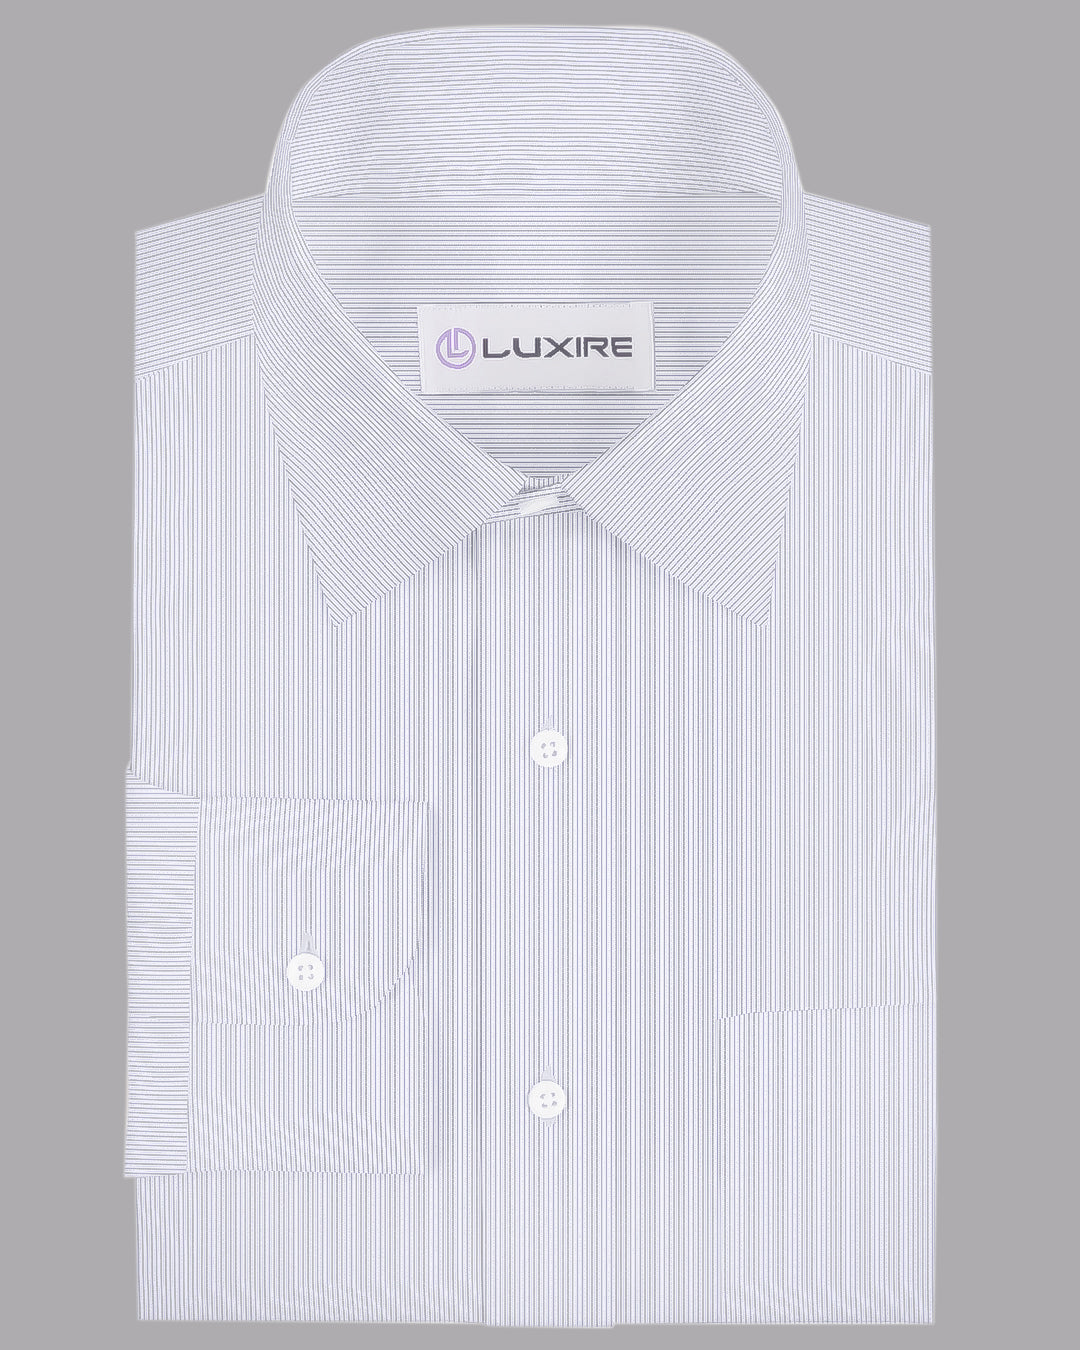 Front of the custom linen shirt for men in white with ink blue stripes by Luxire Clothing